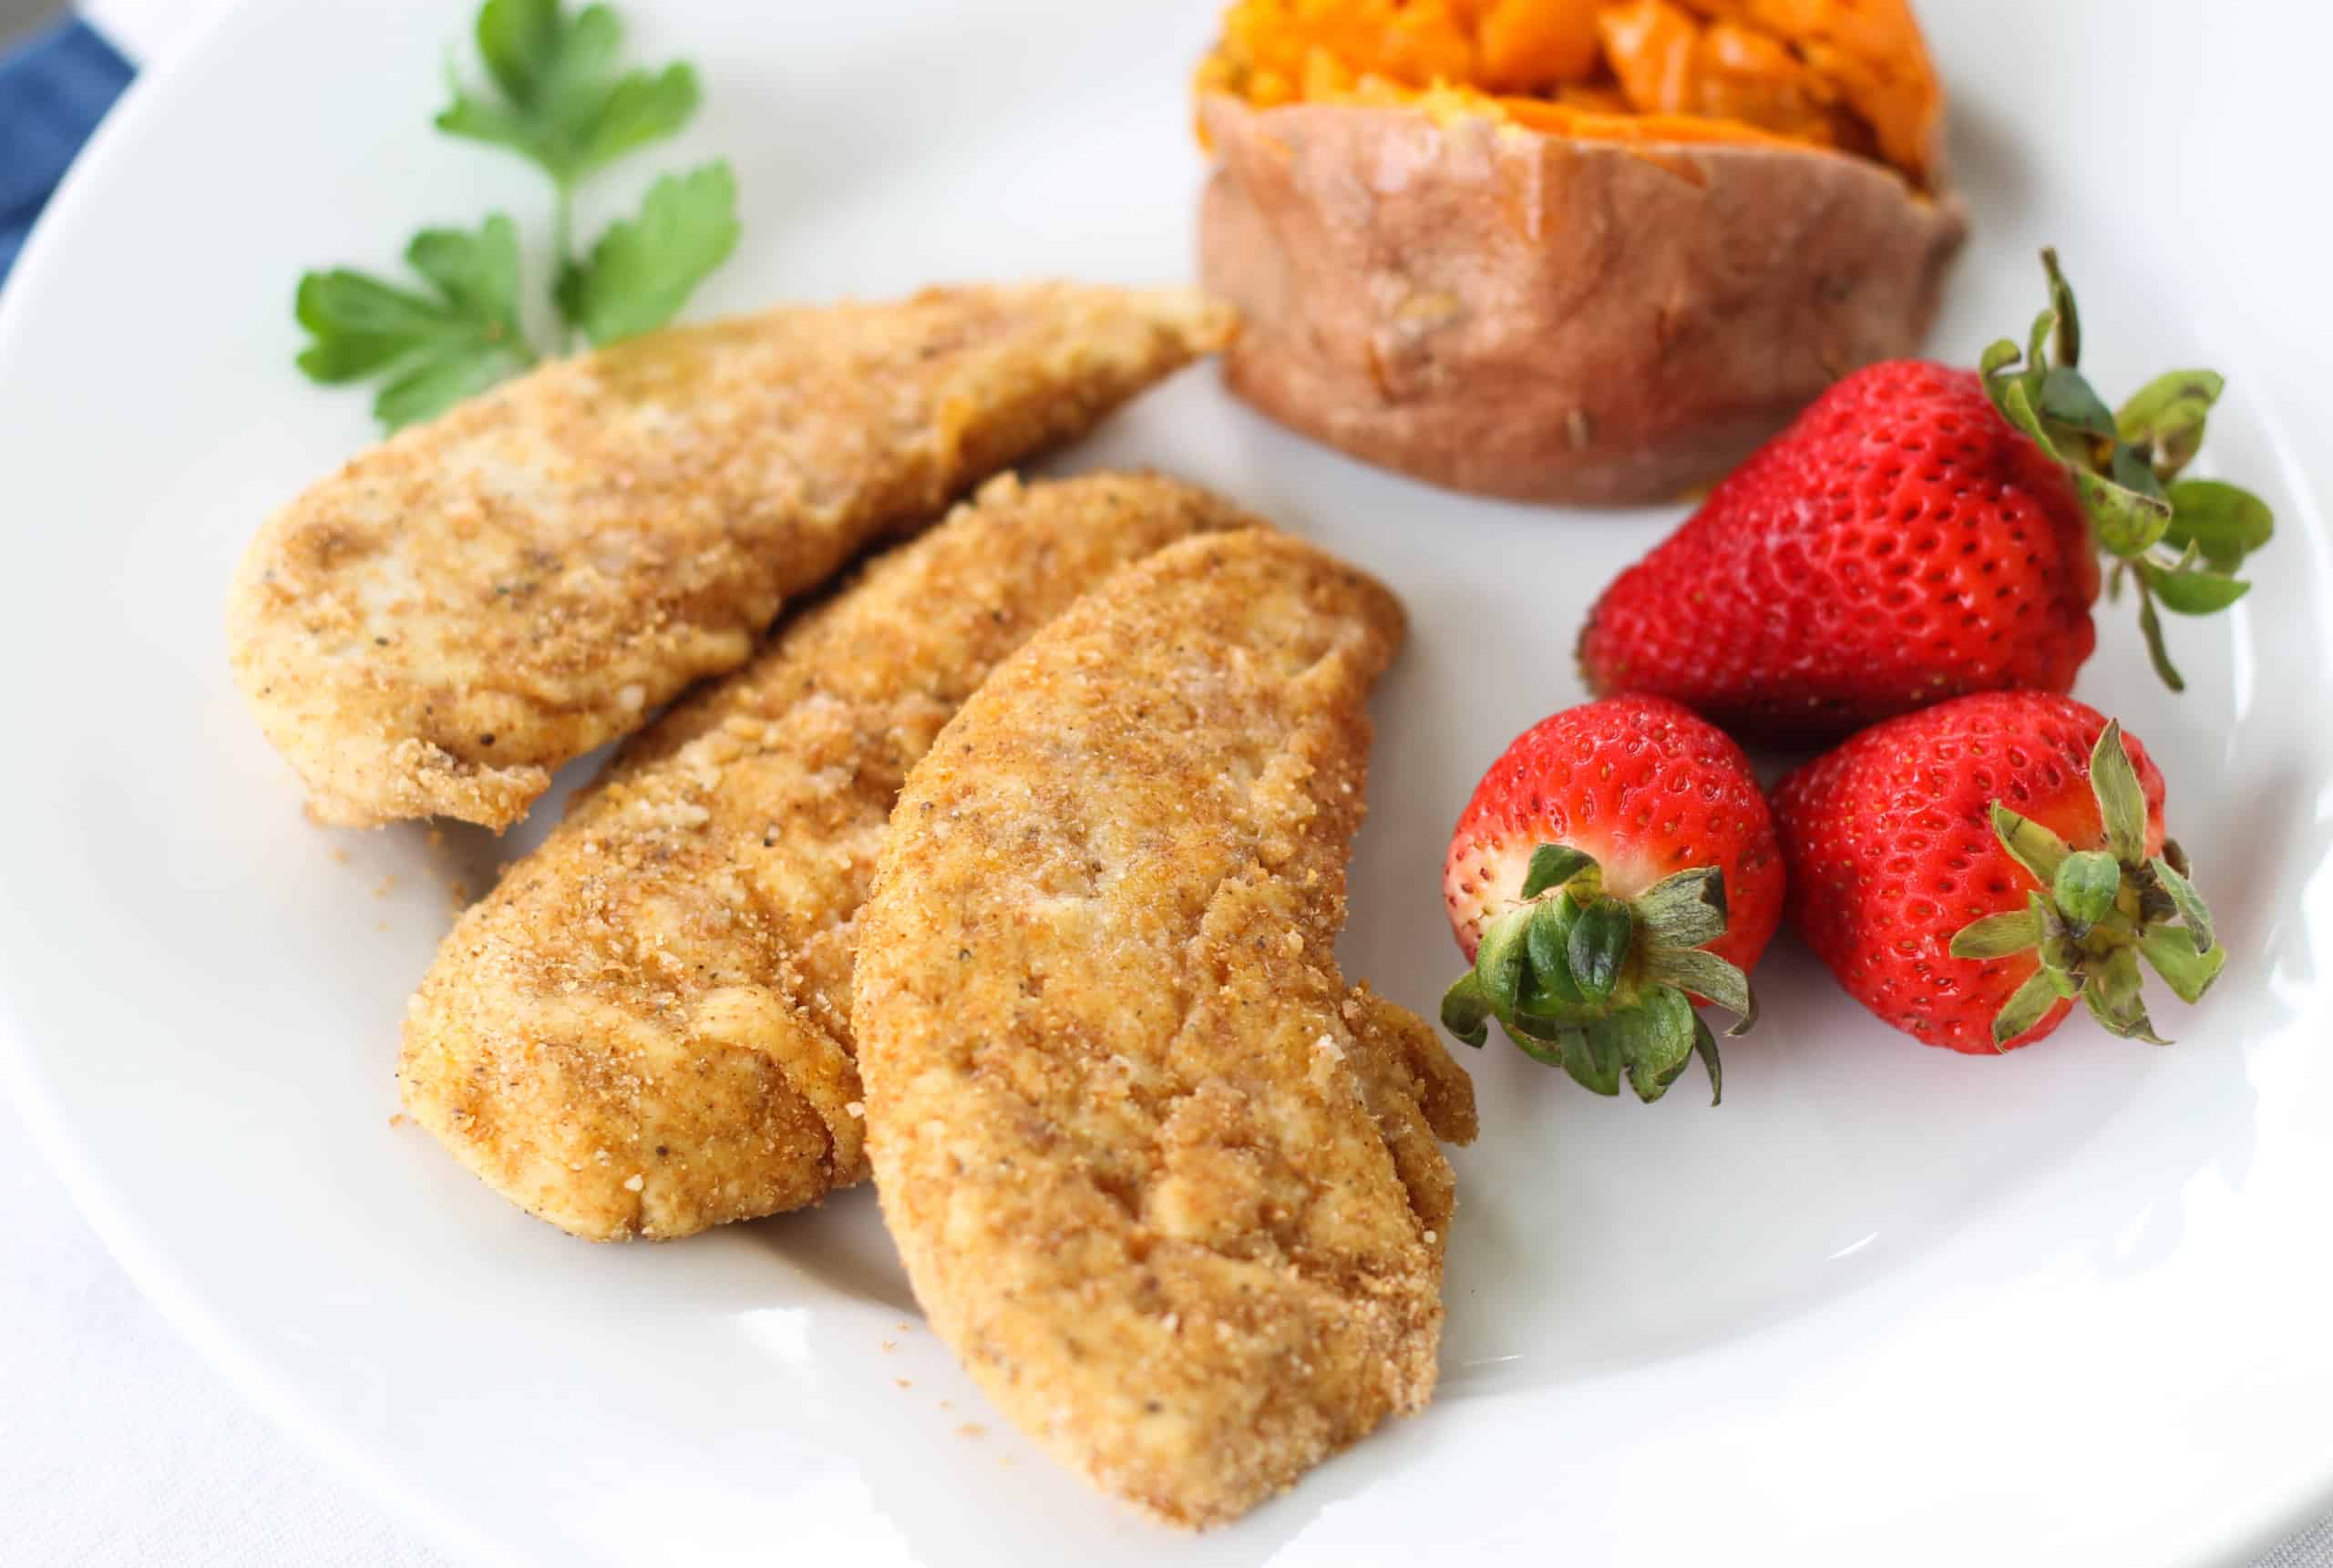 Three oven baked chicken tenders on a plate with strawberries and a baked sweet potato.